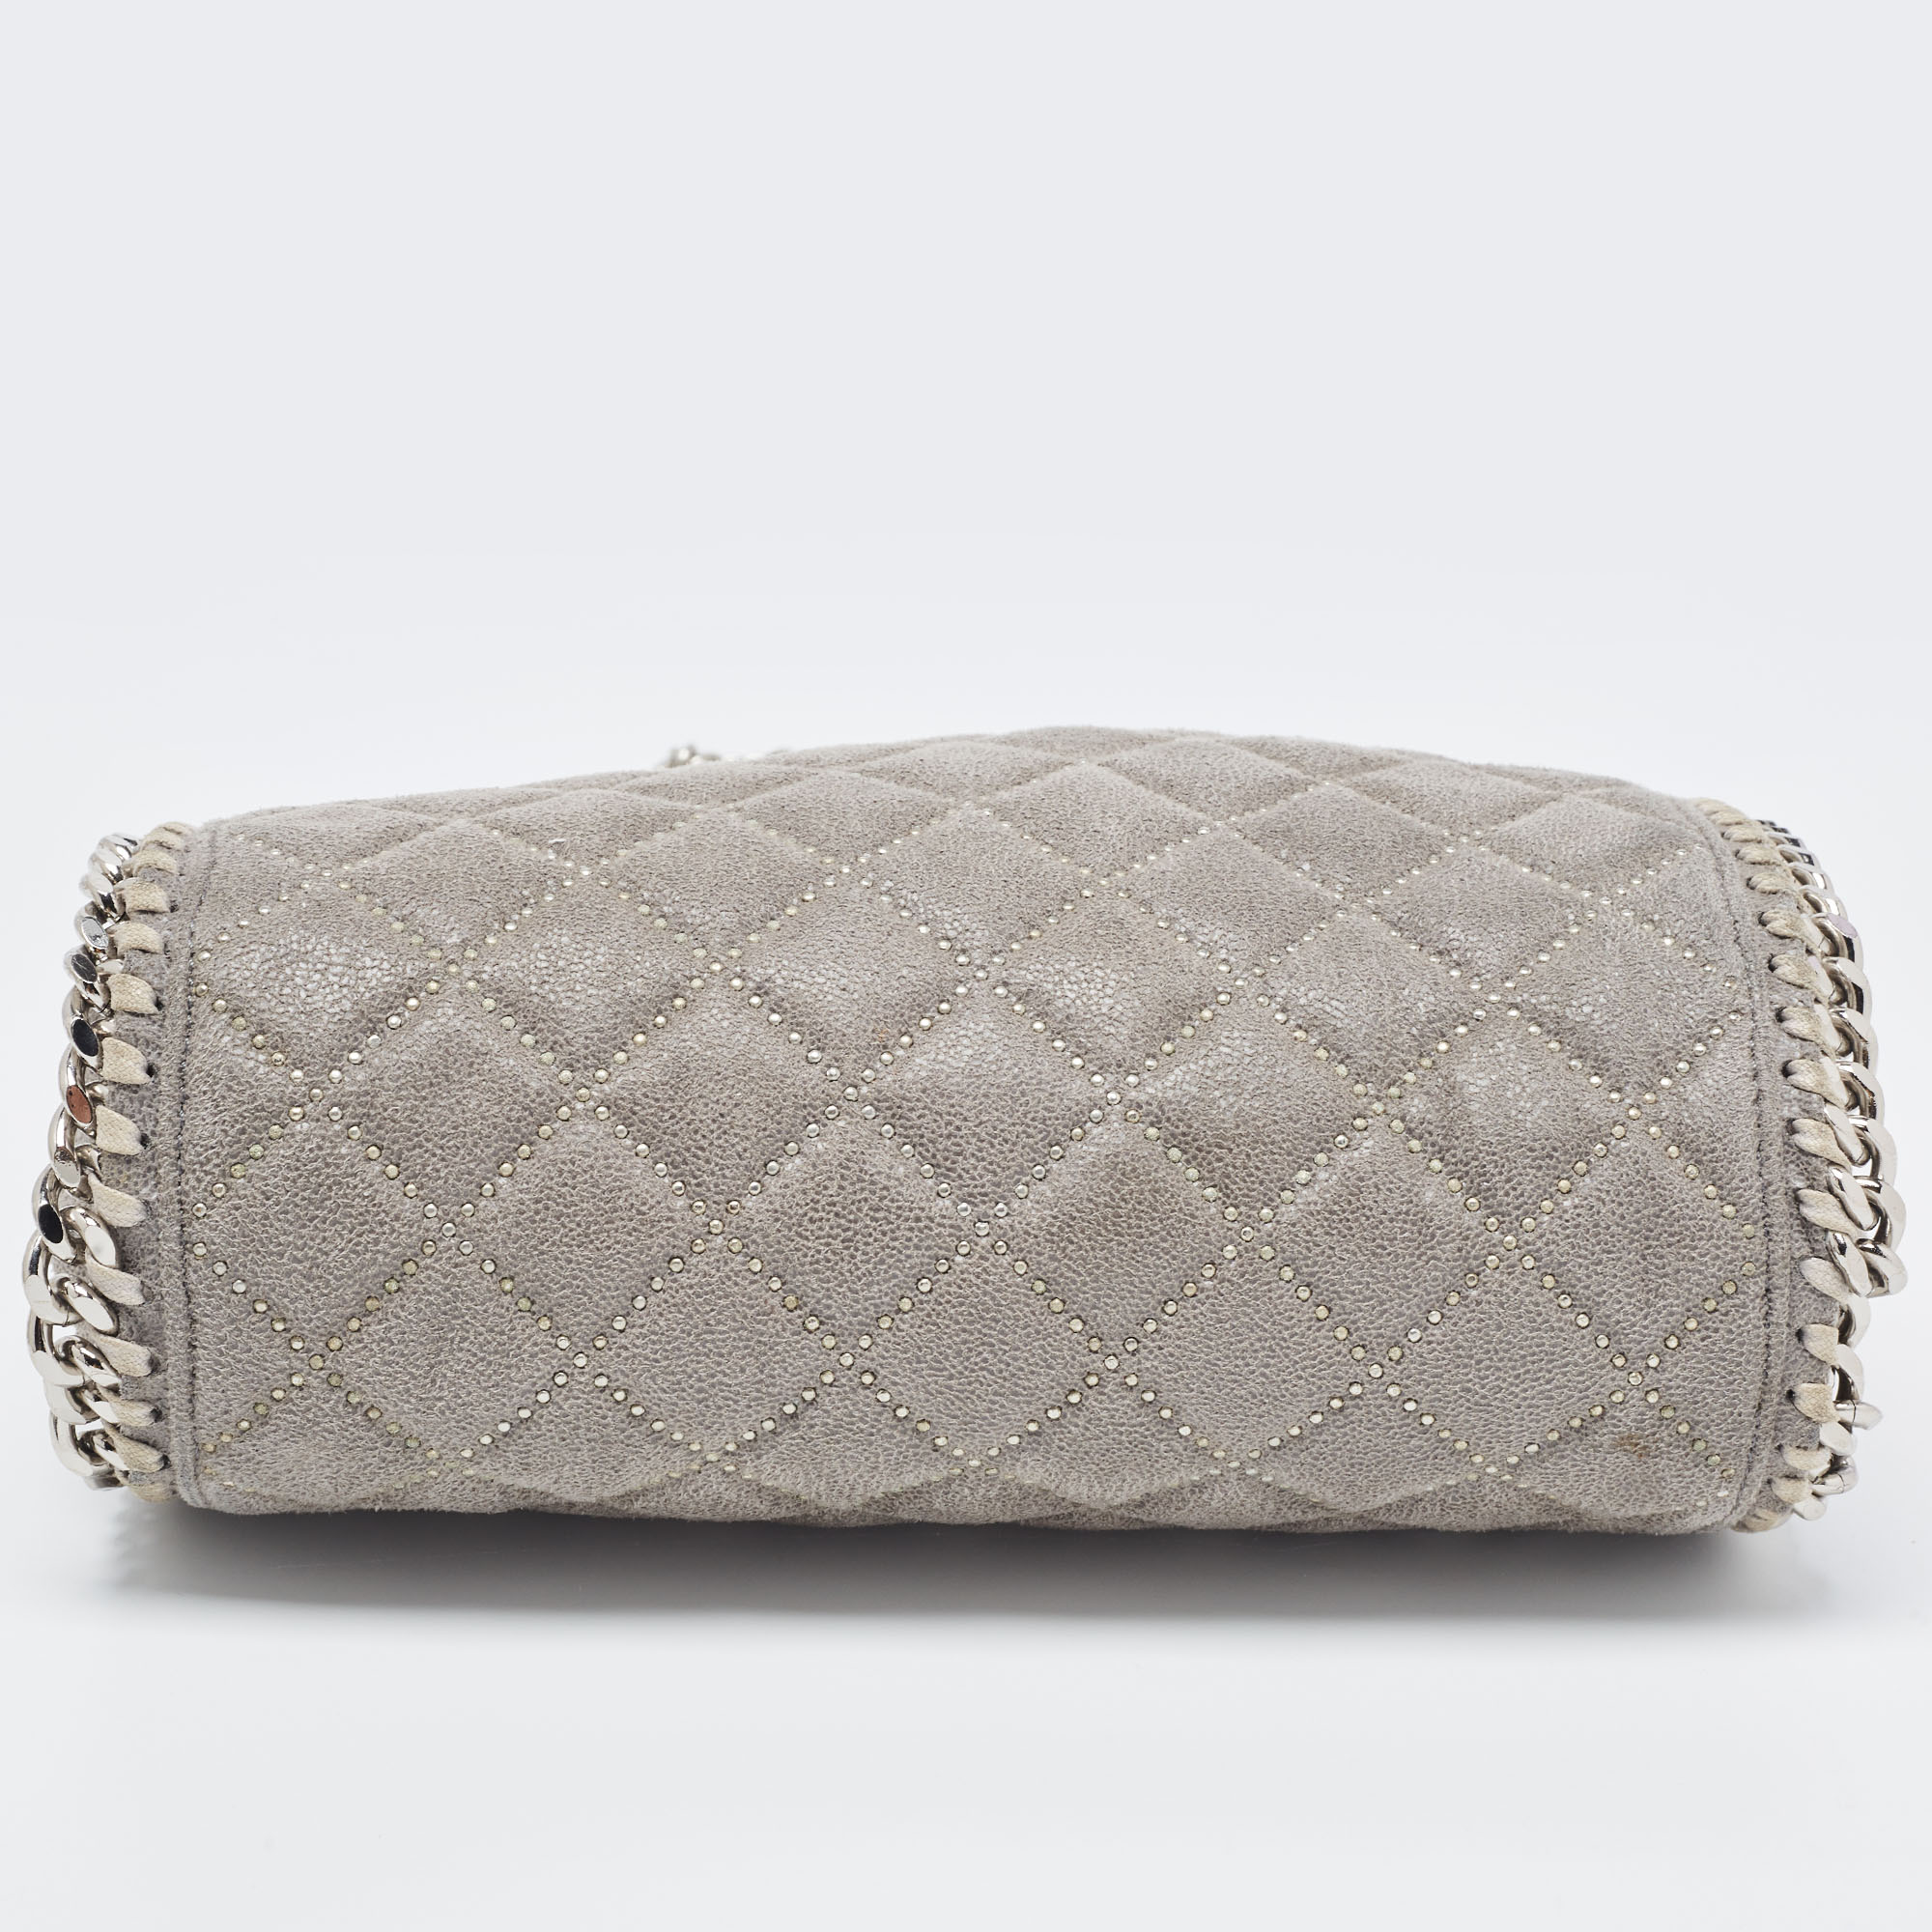 Stella McCartney Grey Quilted Faux Suede Falabella Tote